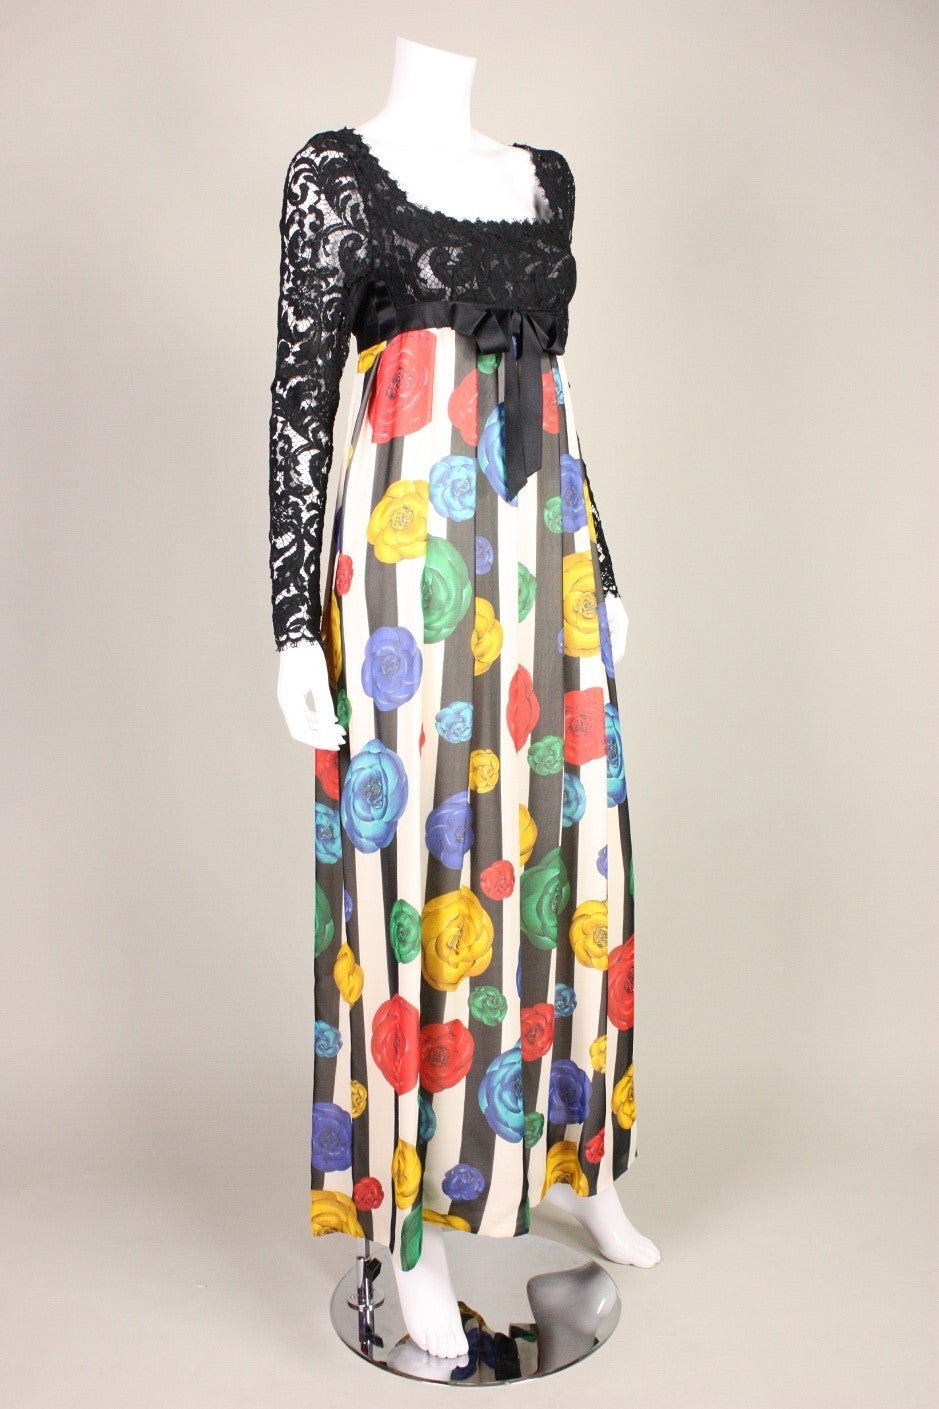 Vintage gown was designed by Karl Lagerfeld for Chanel in the early 1990's.  Long-sleeved bodice is made of black lace and has a squared neckline with a scalloped edge.  Signature multi-colored camellia print skirt also has a striped print.  Satin